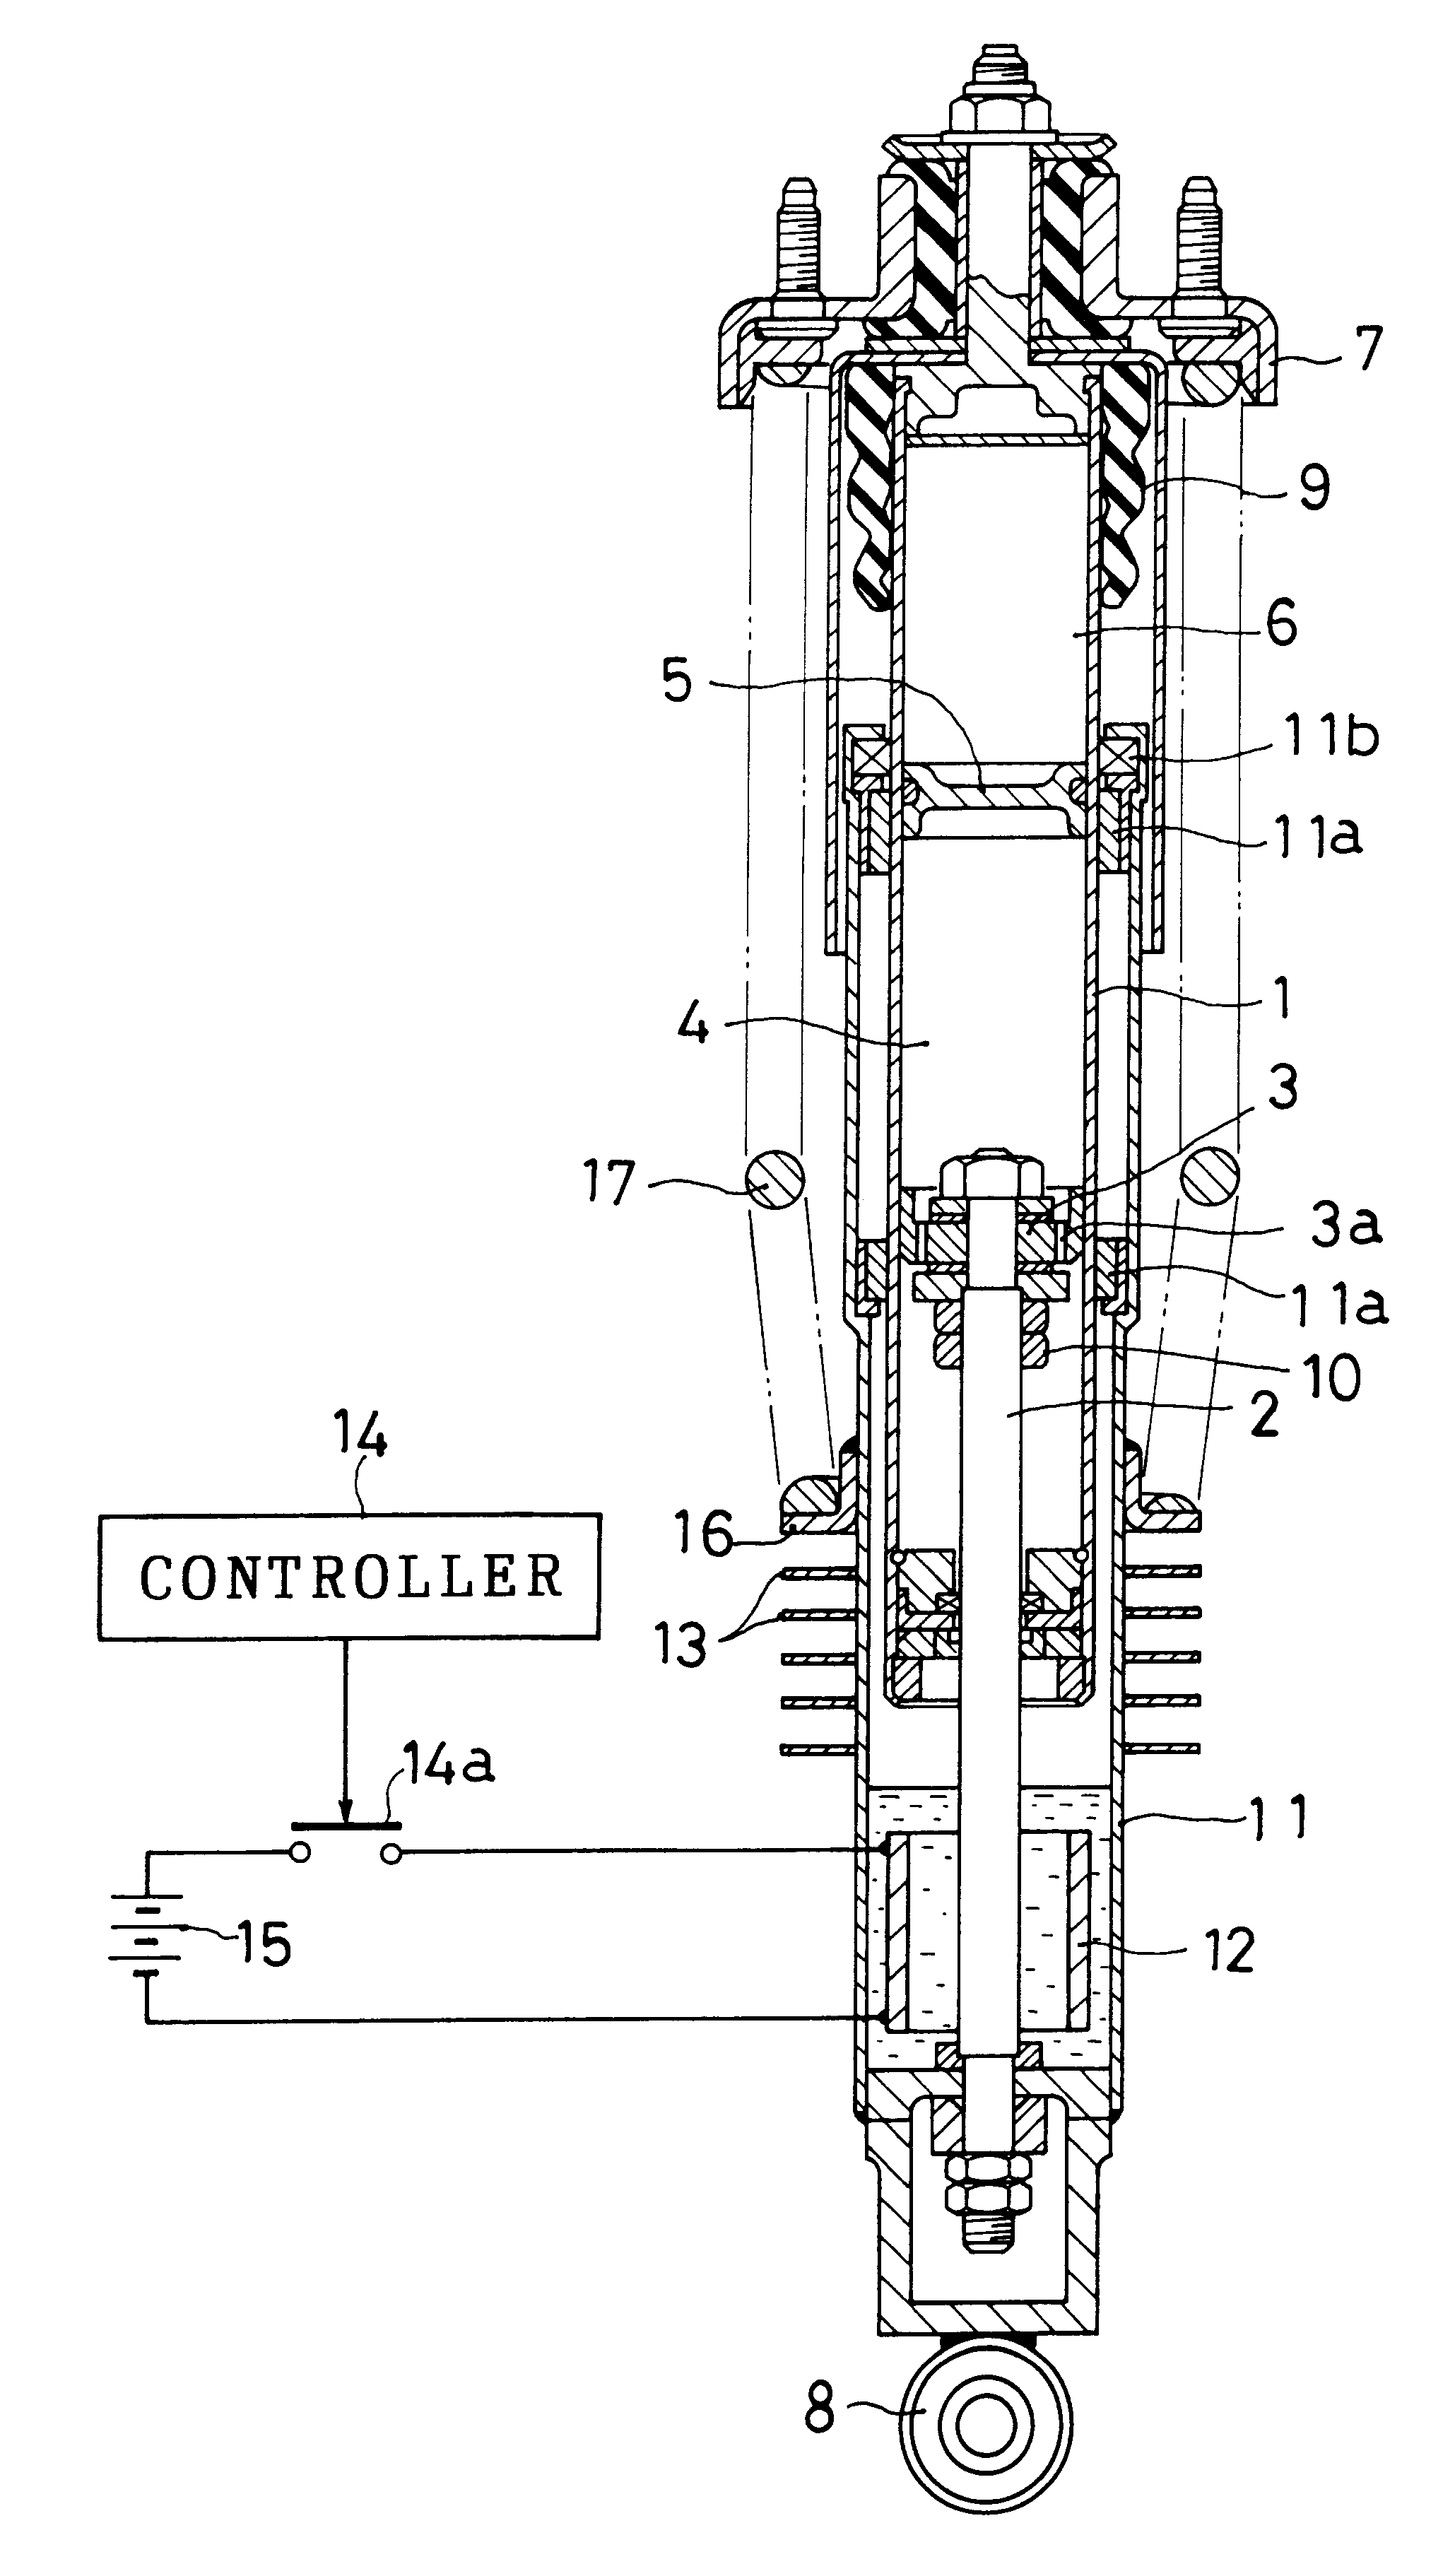 Vehicular damper with vehicle height adjusting function having an internal heat source